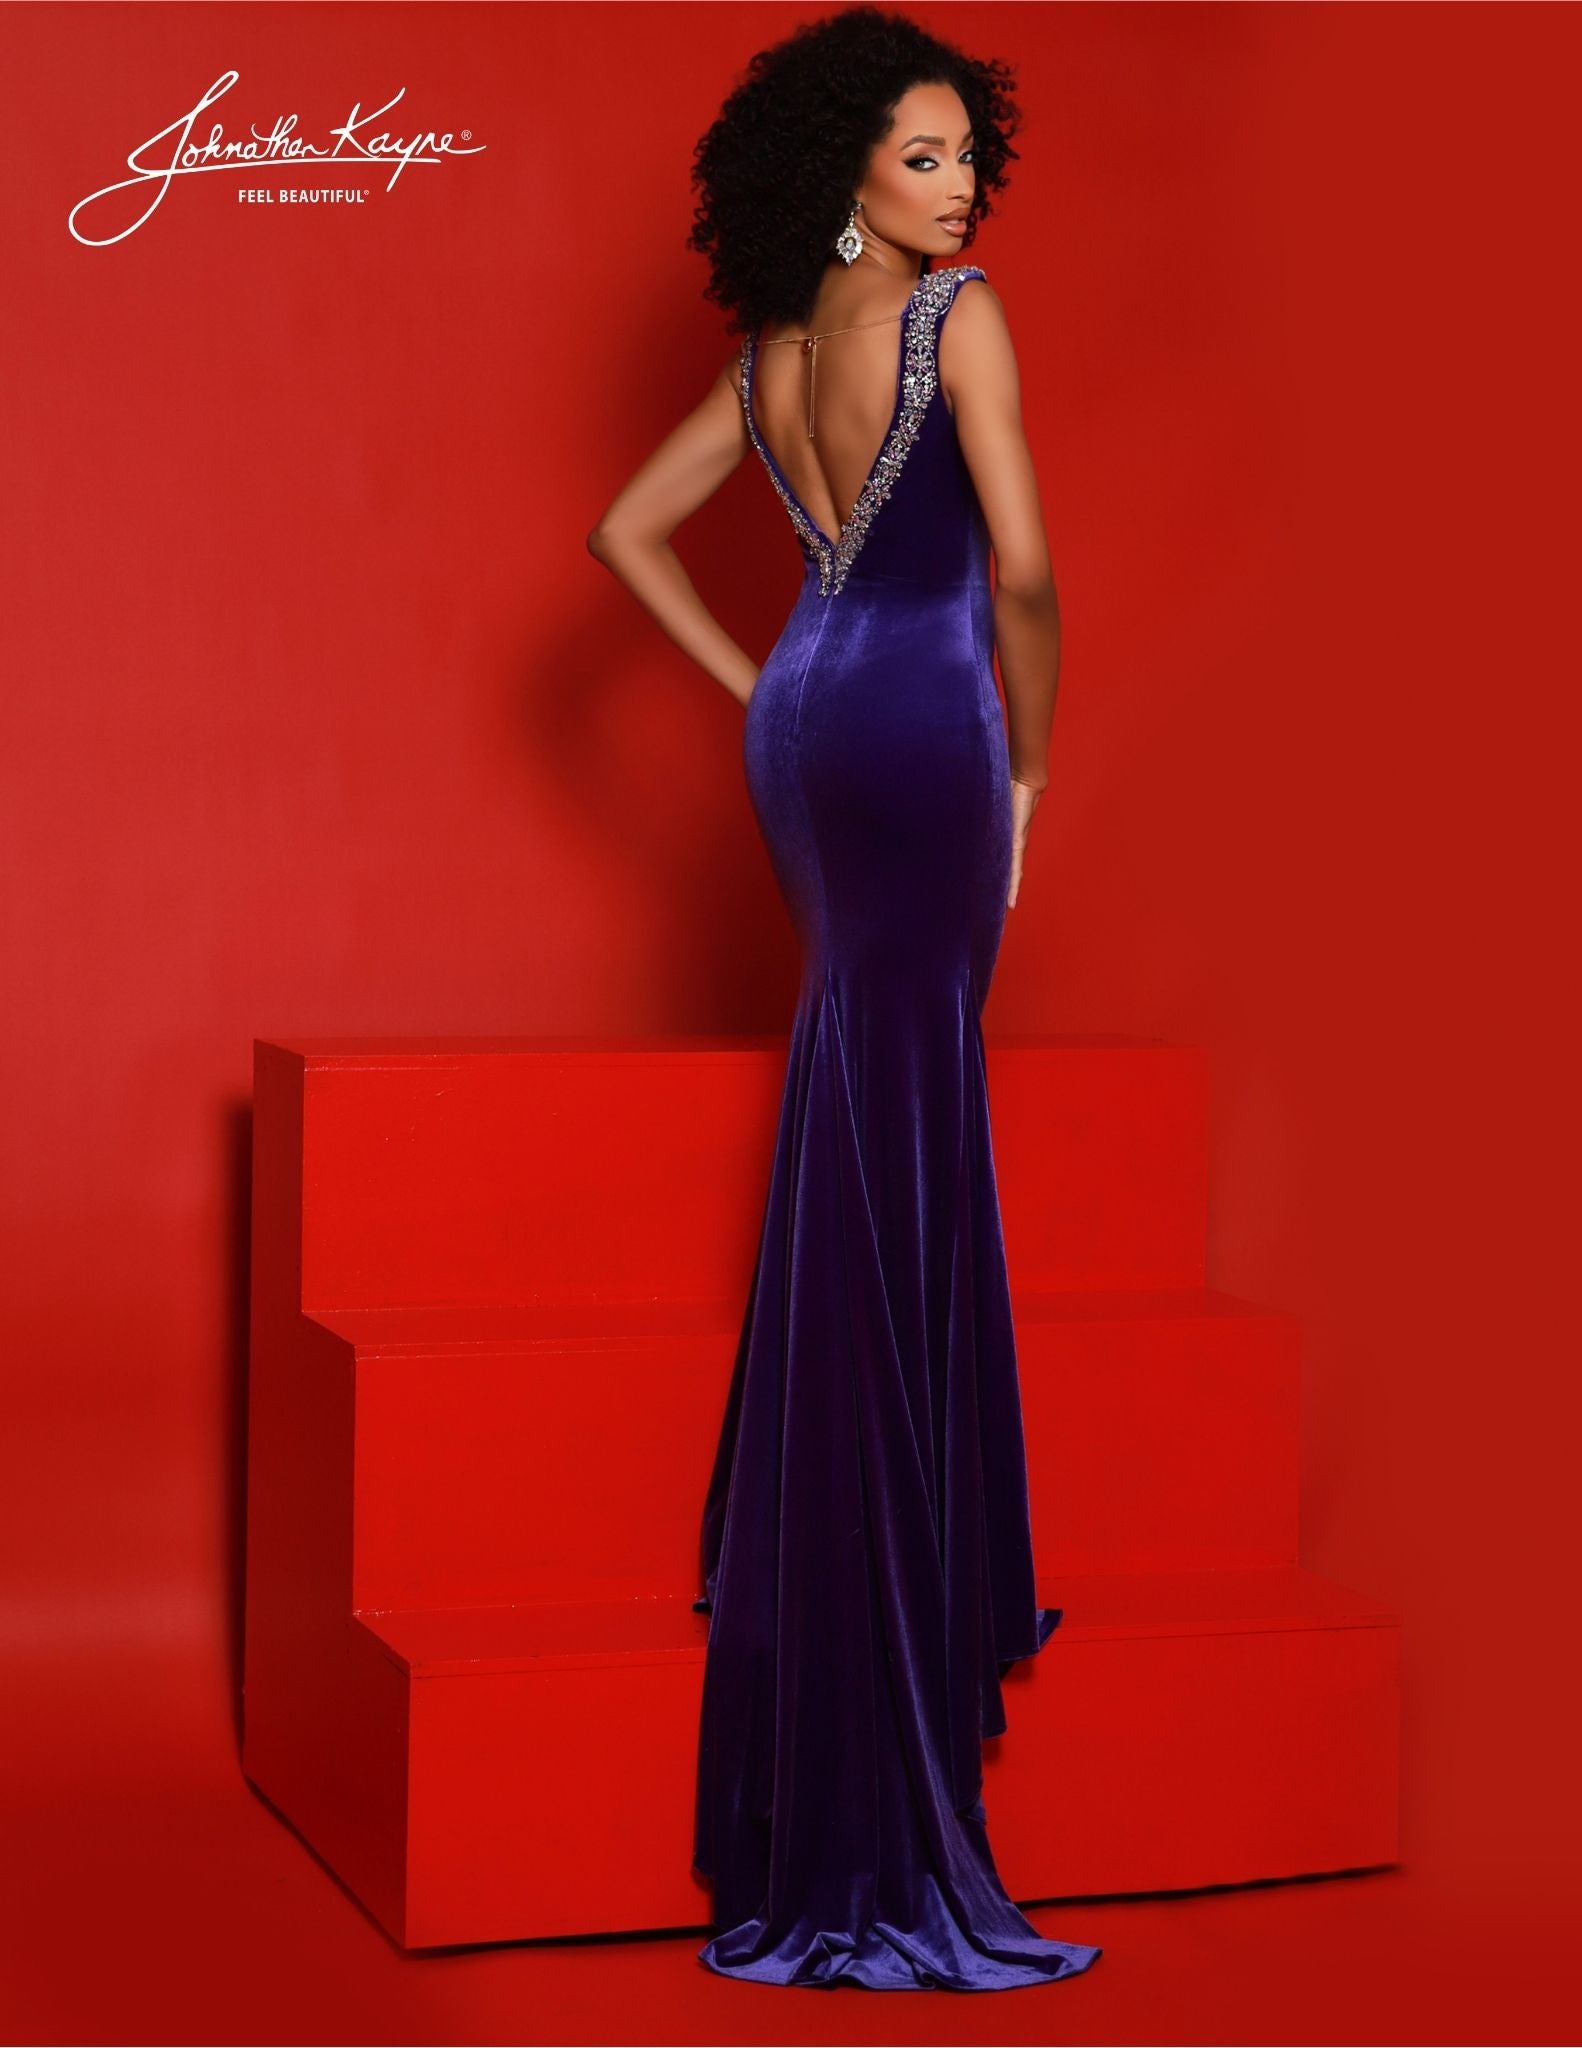 Featuring a low V-neckline, crystal straps, and a train, Johnathan Kayne 2877 is the perfect formal dress for special occasions. A beautiful velvet gown that flatters the figure with a beautiful silhouette, this Johnathan Kayne creation is sure to make a statement. Elegance knows no bounds in this stretch velvet gown. Adorned with encrusted crystal straps and a sultry low-V neckline, this gown exudes opulence and elegance. 